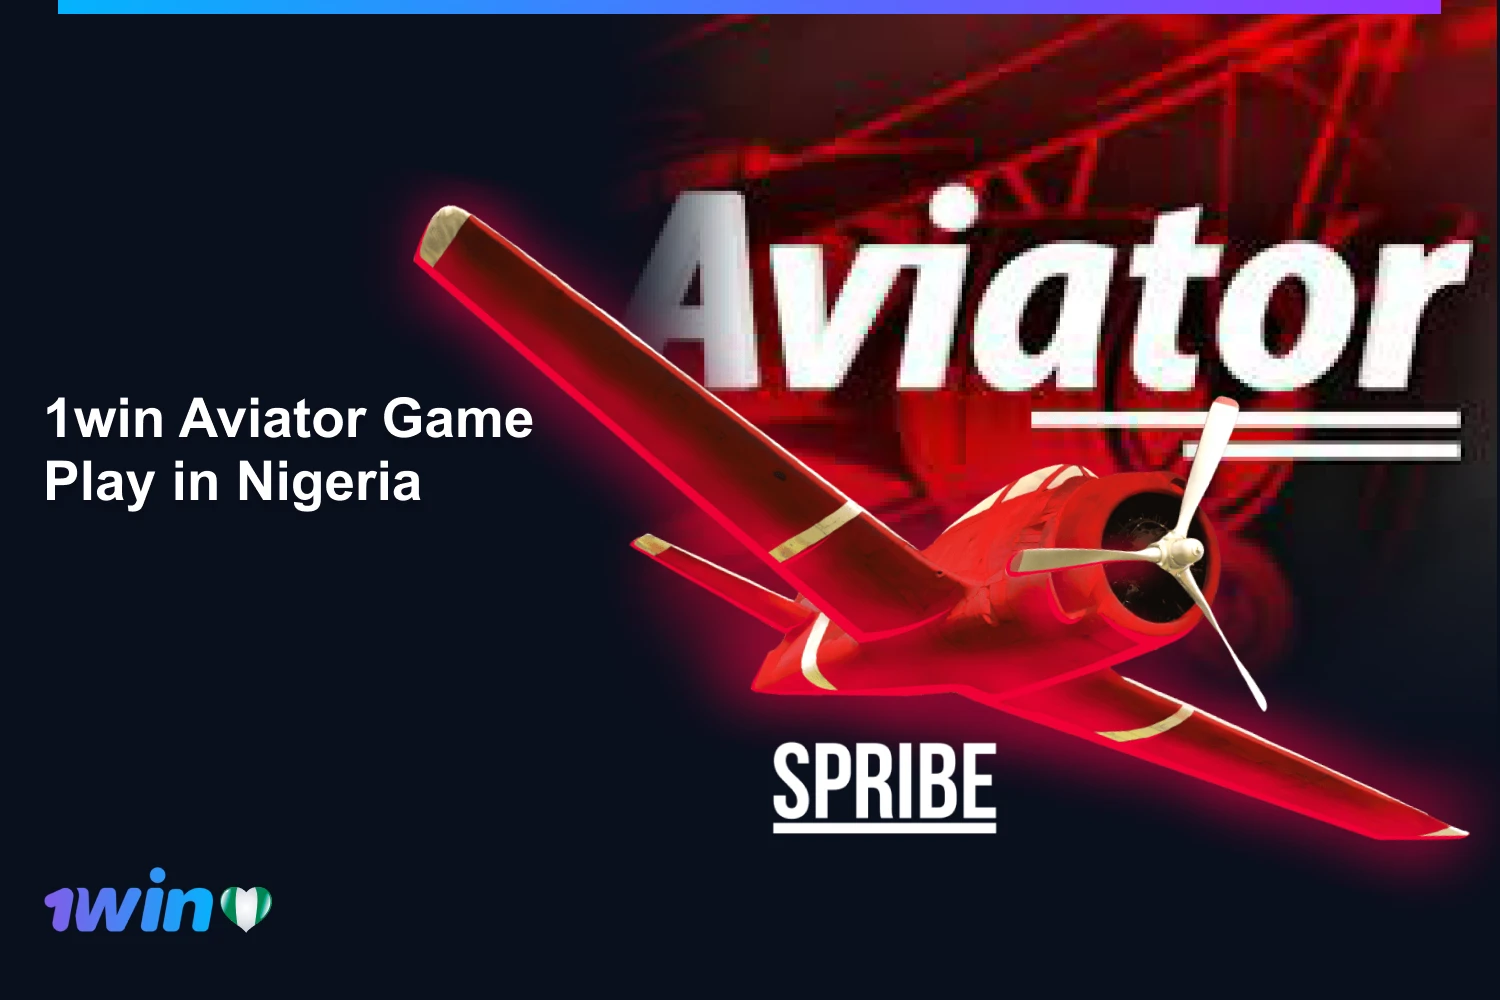 1win Nigeria offers Aviator game developed by Spribe for those who love to play crash games